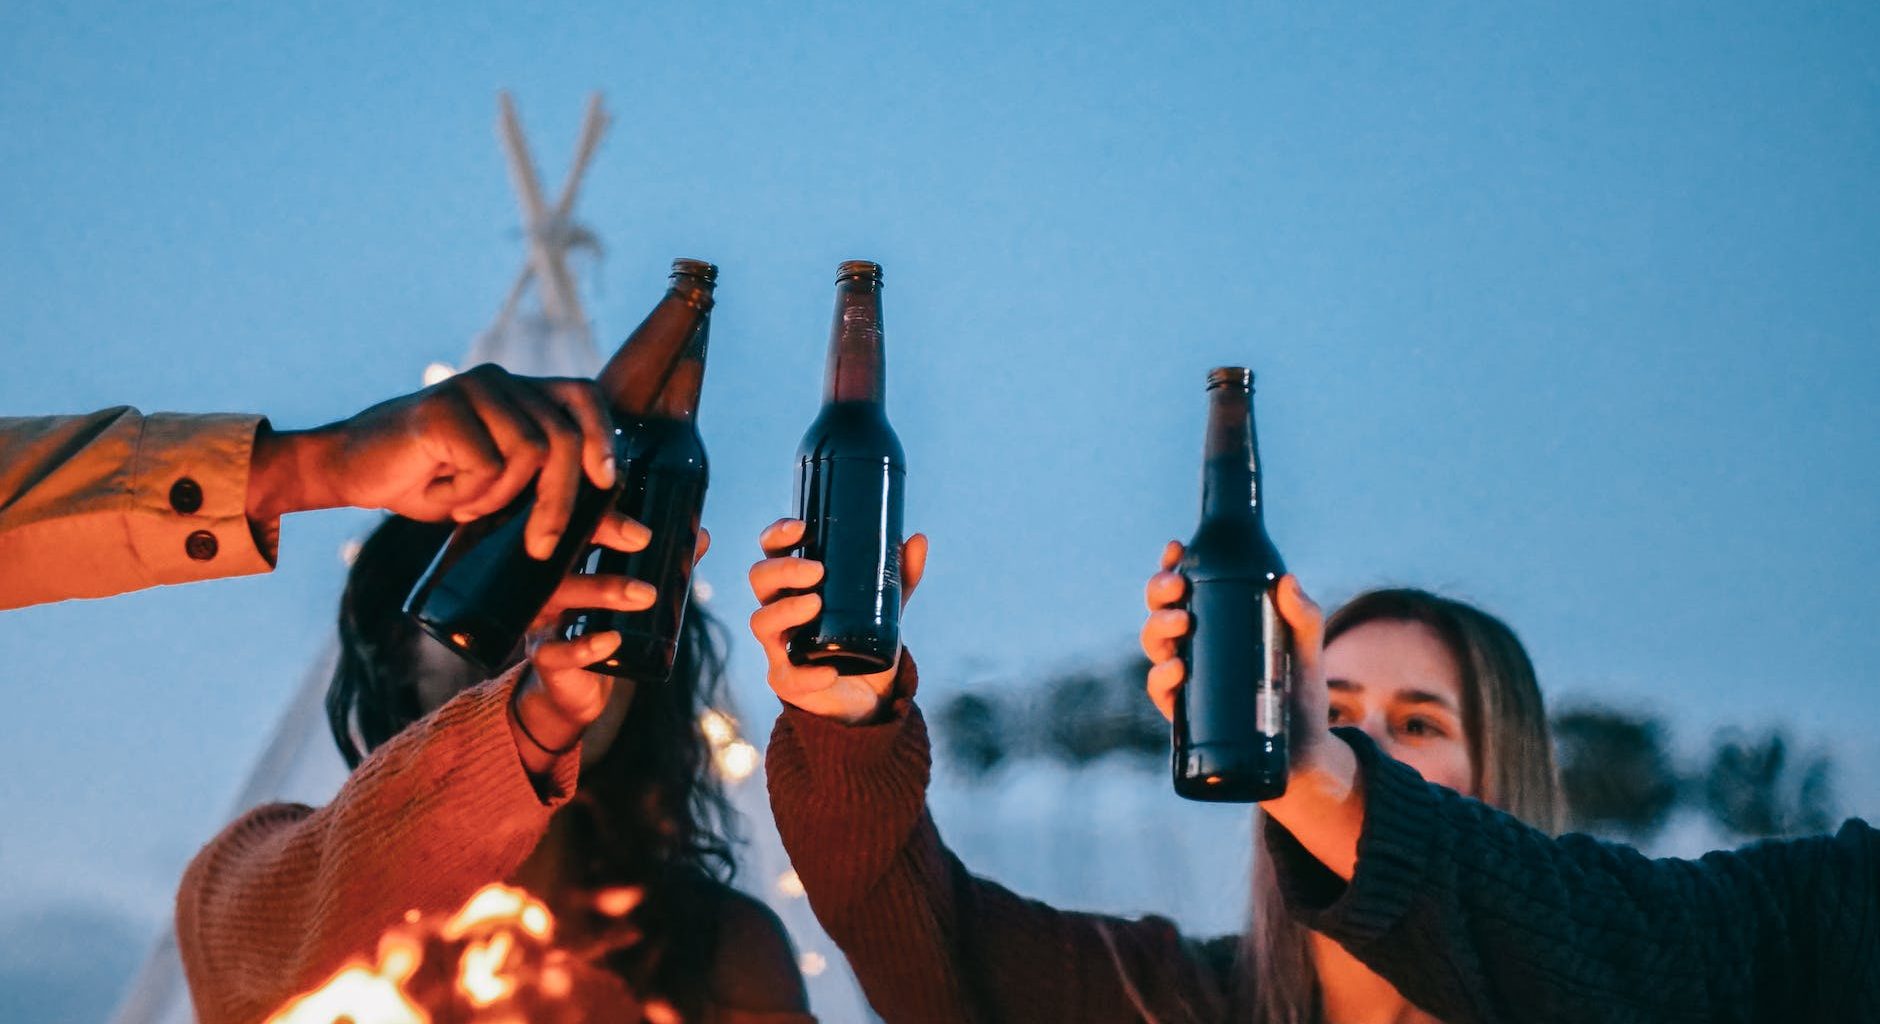 group of friends clinking beer bottles